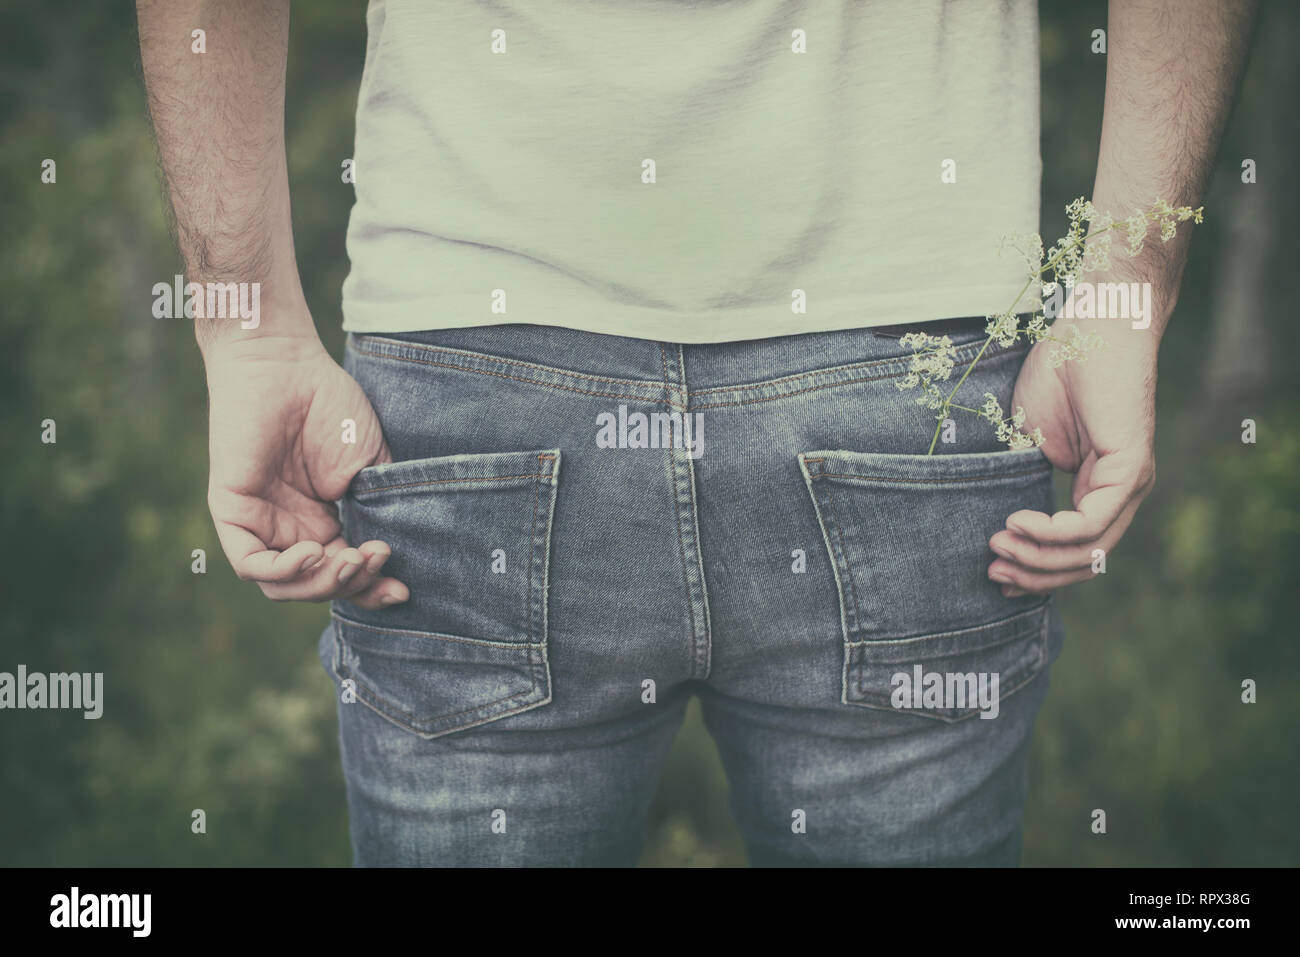 Close-up of a man with his hands in his pockets wearing jeans Stock Photo